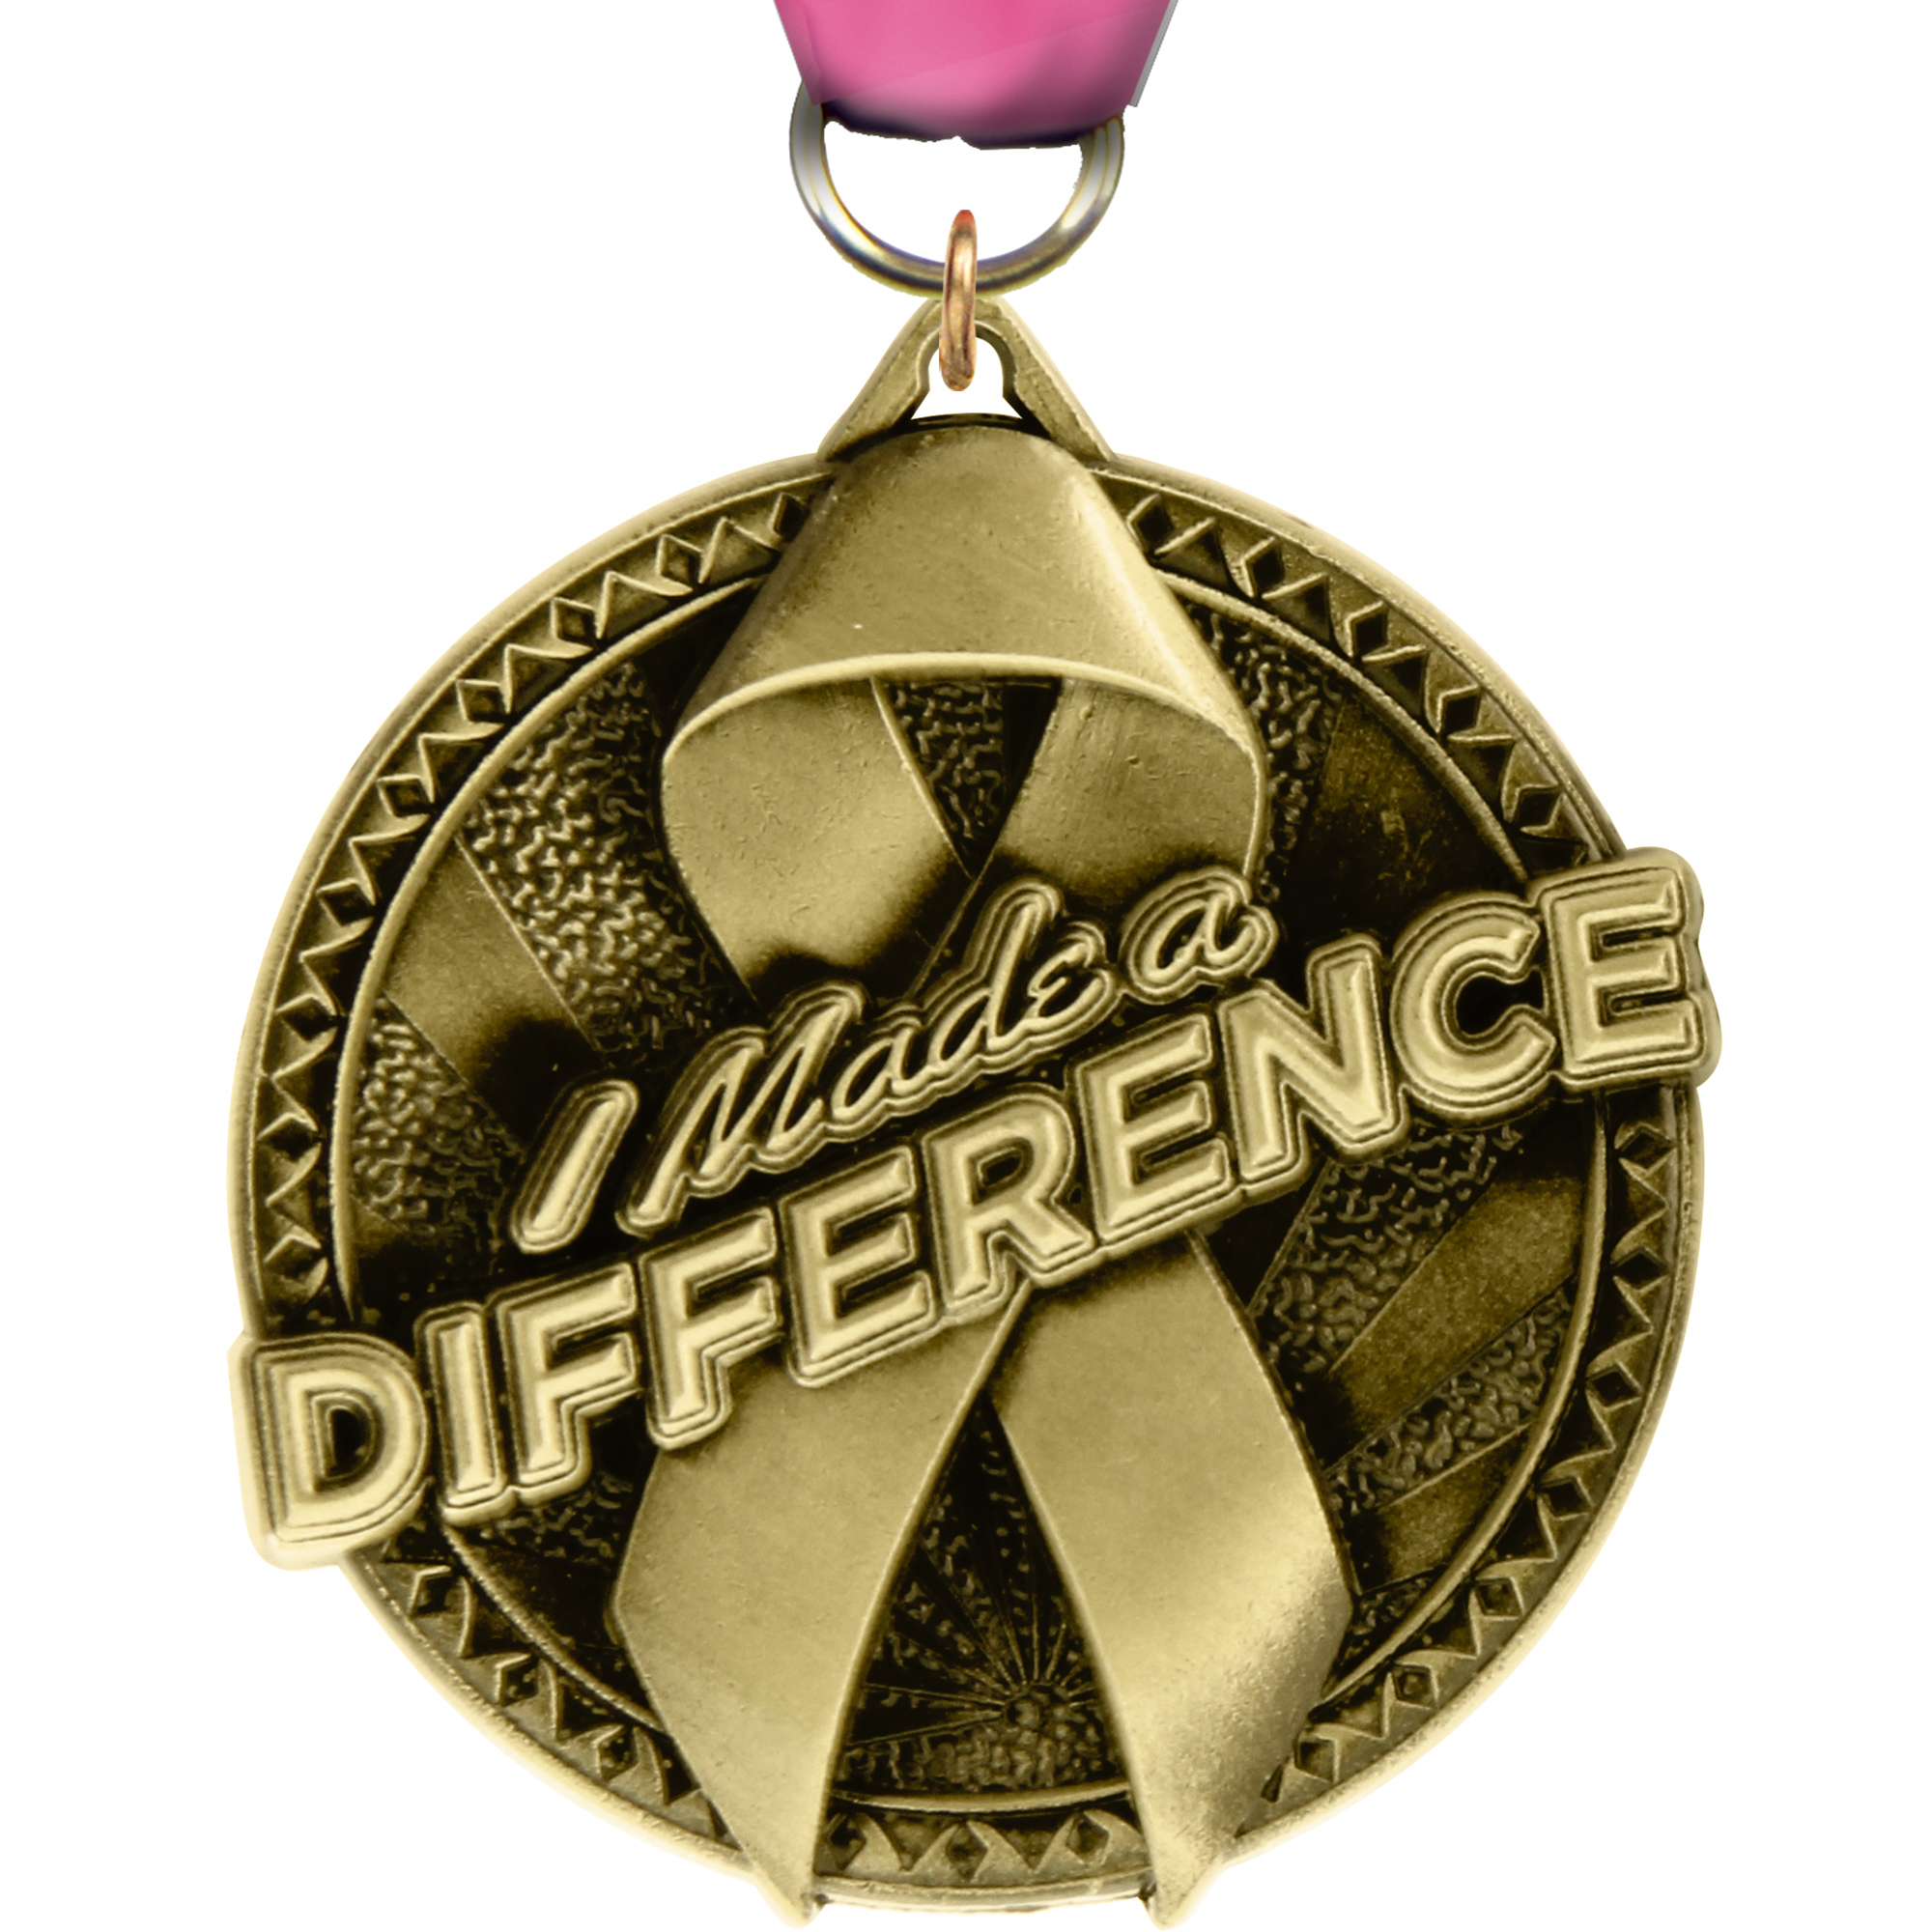 I Made a Difference Ultra-Impact 3-D Medal